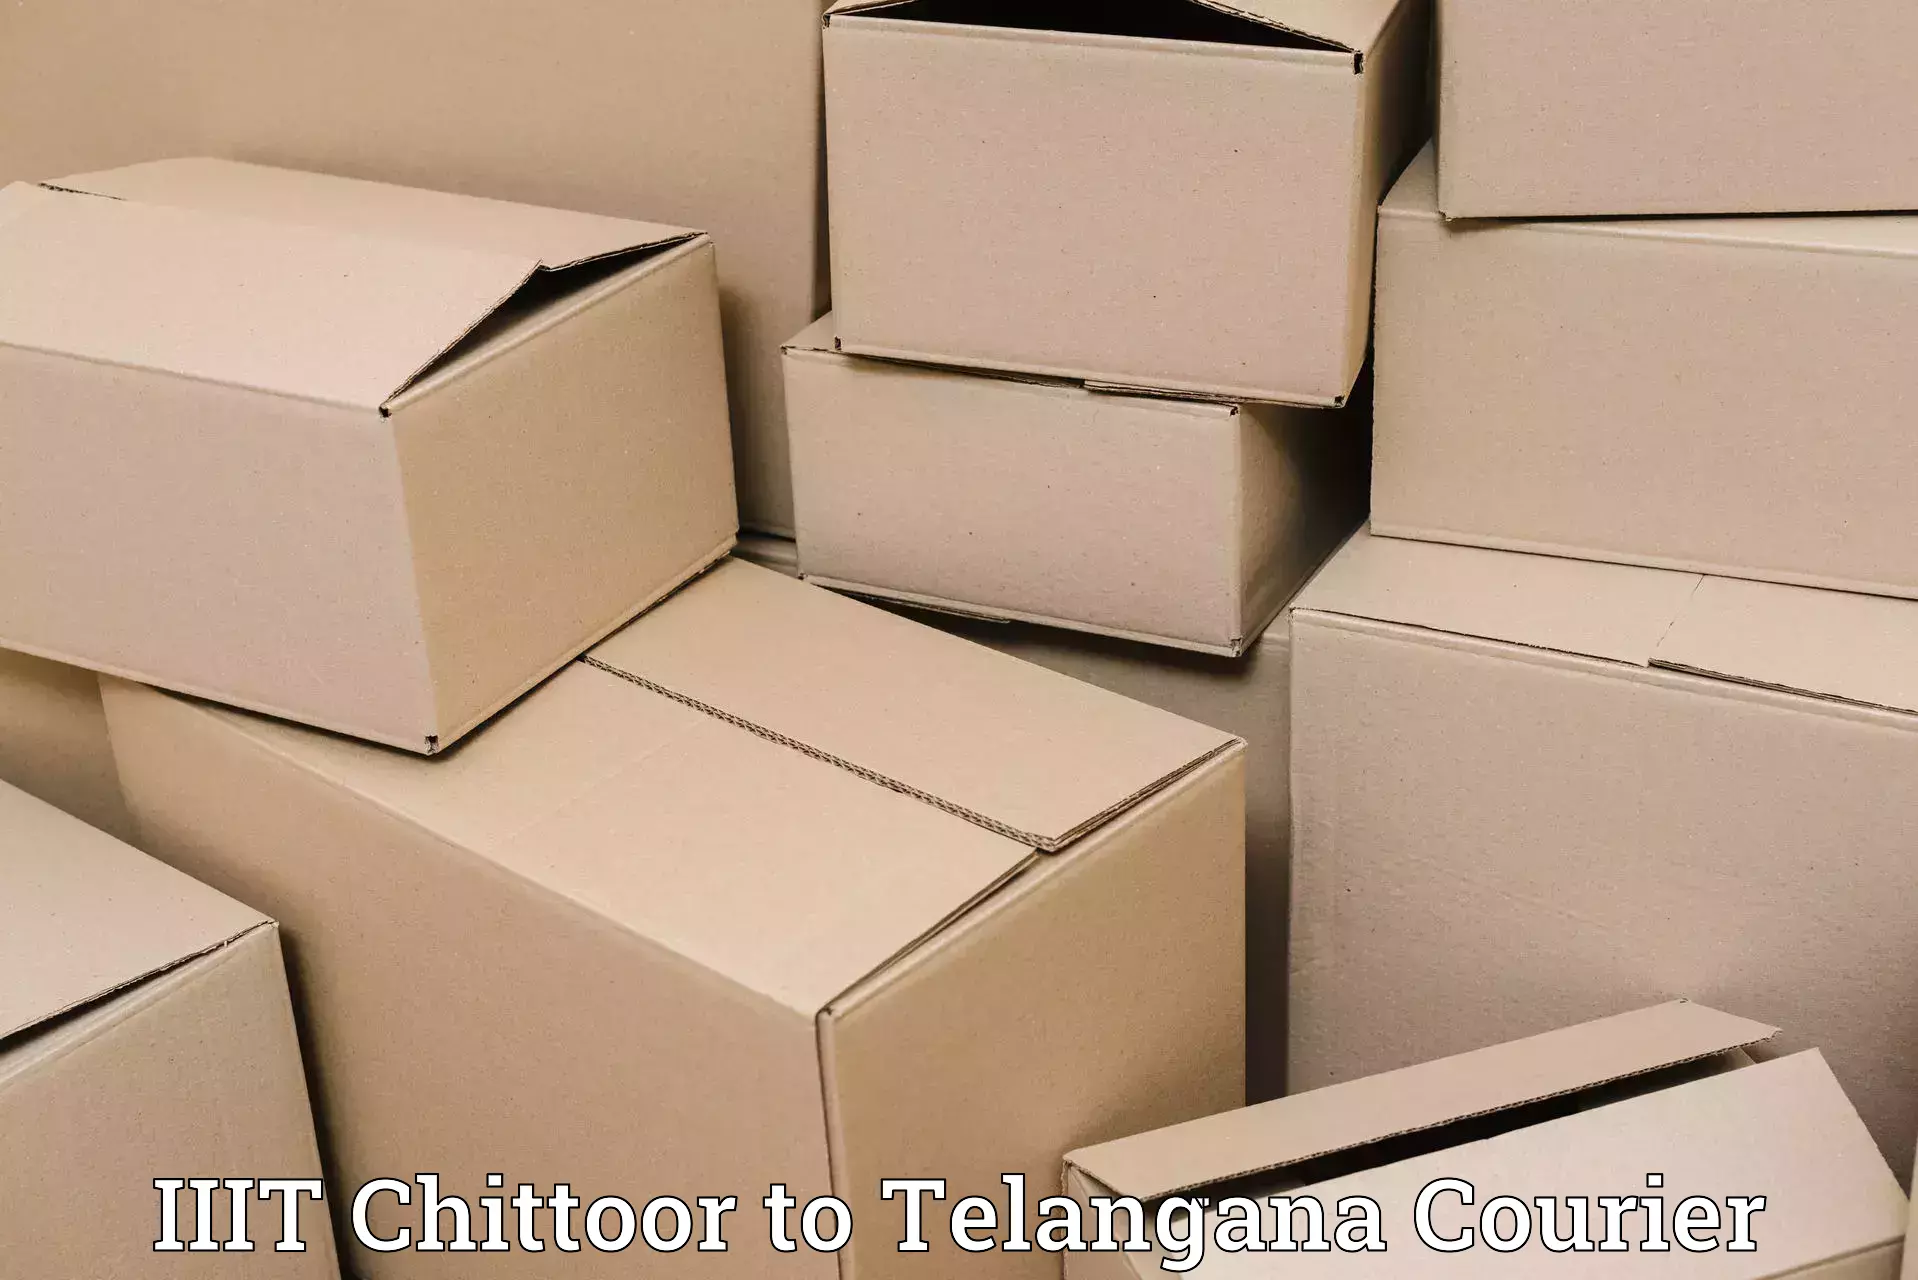 High-capacity courier solutions IIIT Chittoor to Peddapalli